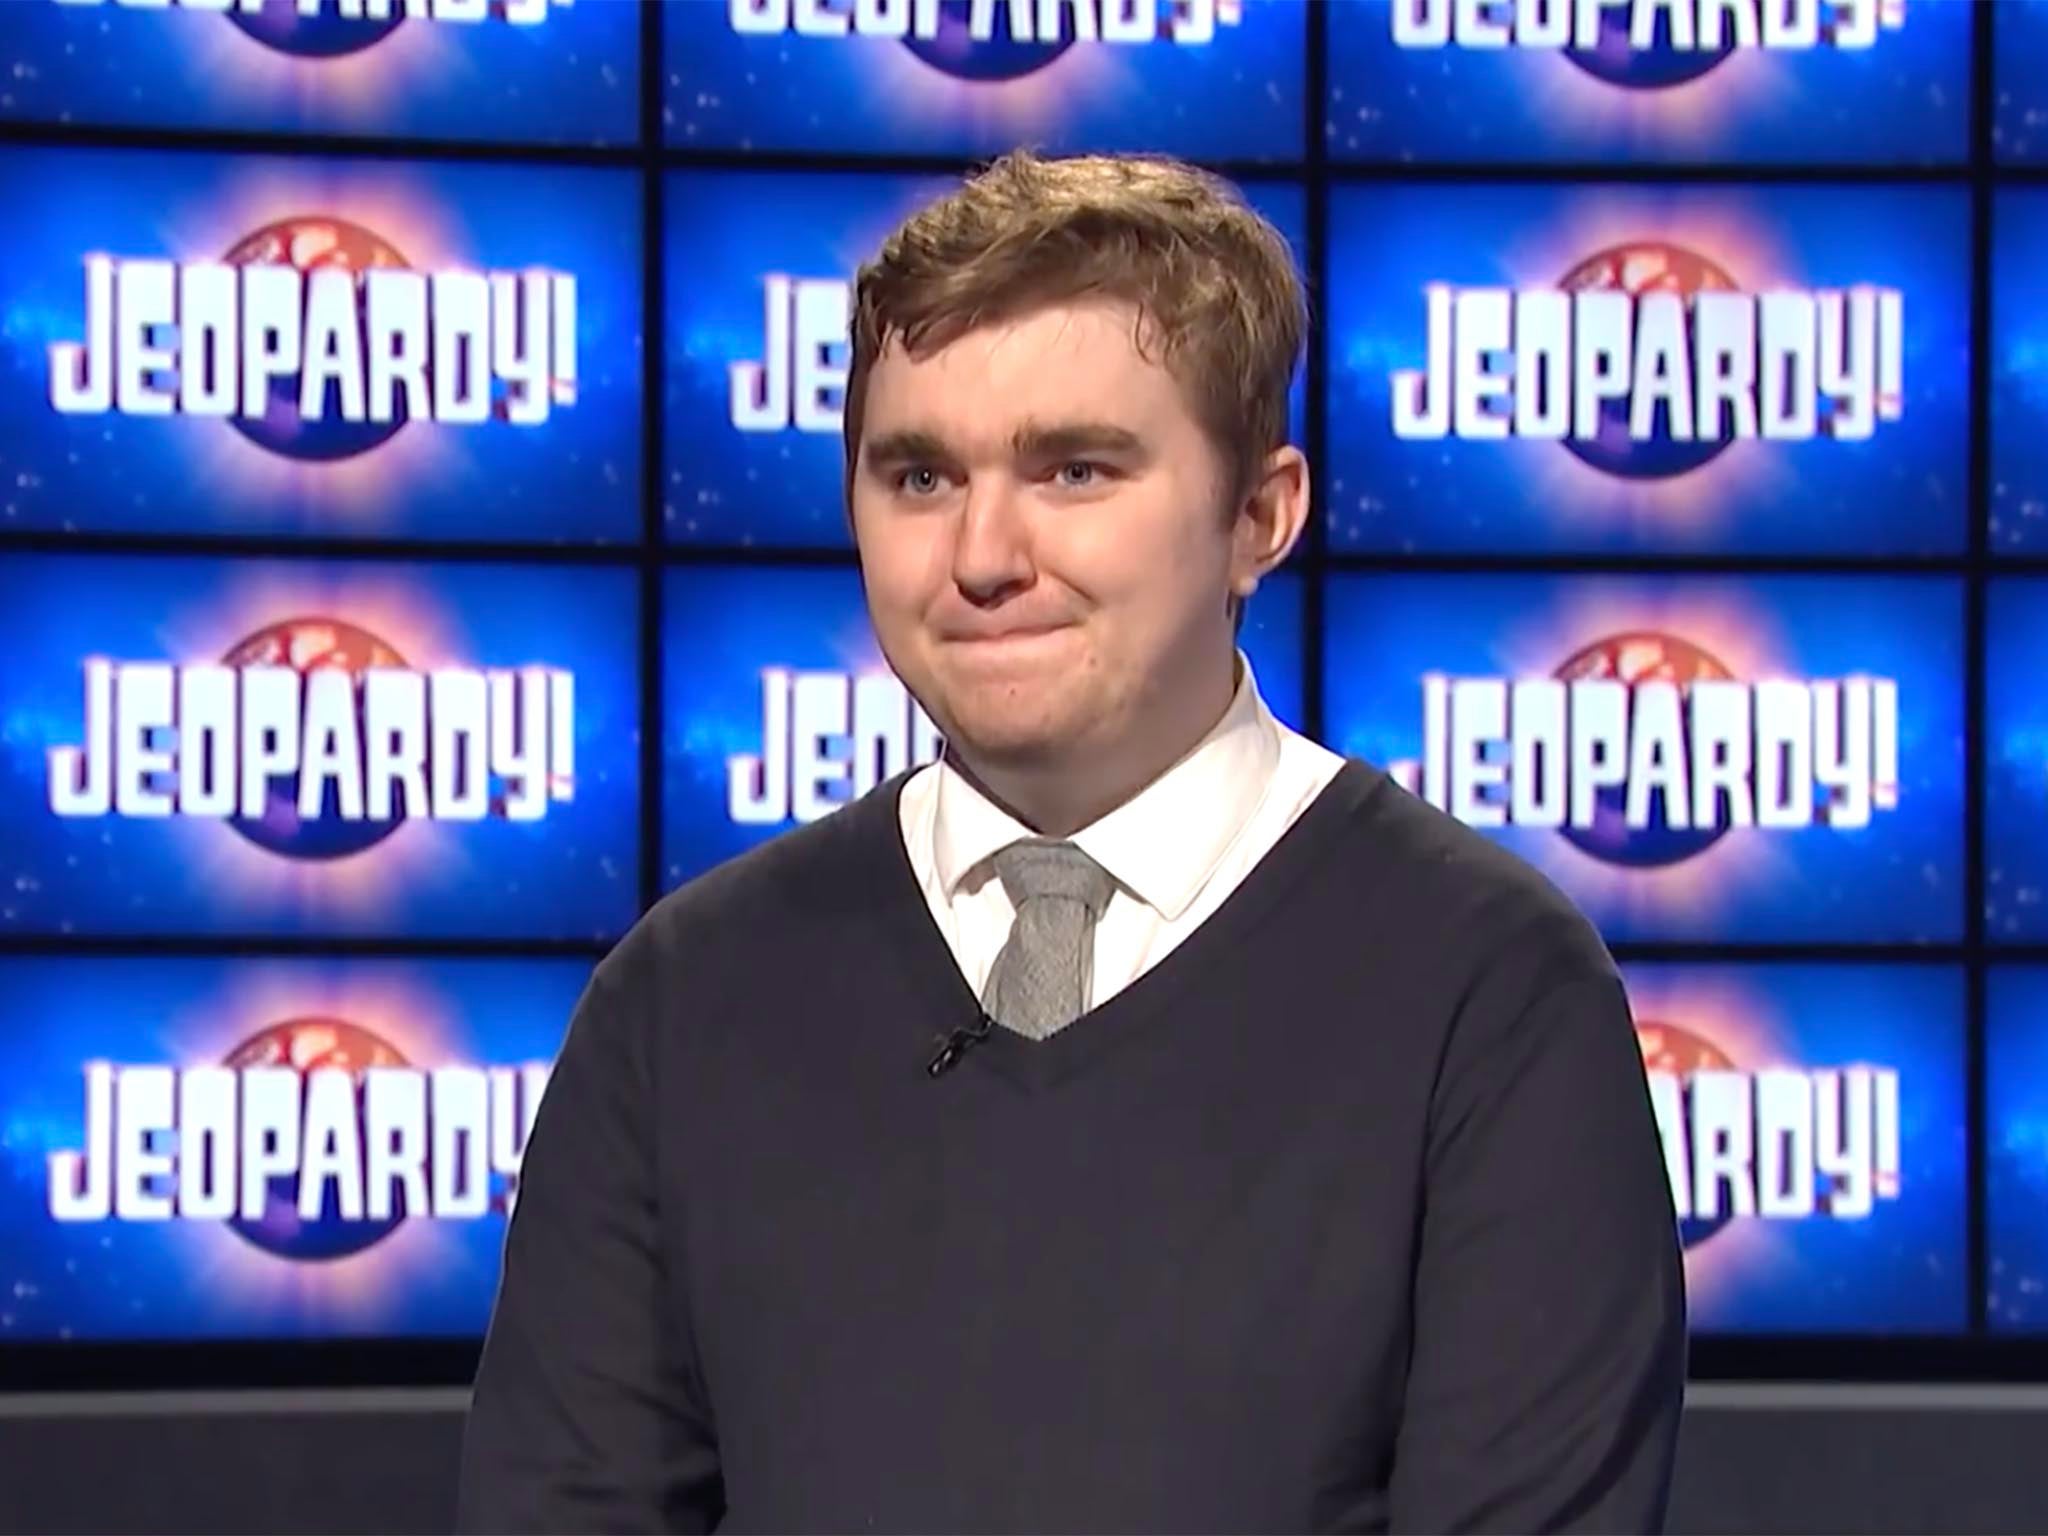 Jeopardy! winner Brayden Smith, who has died at 24